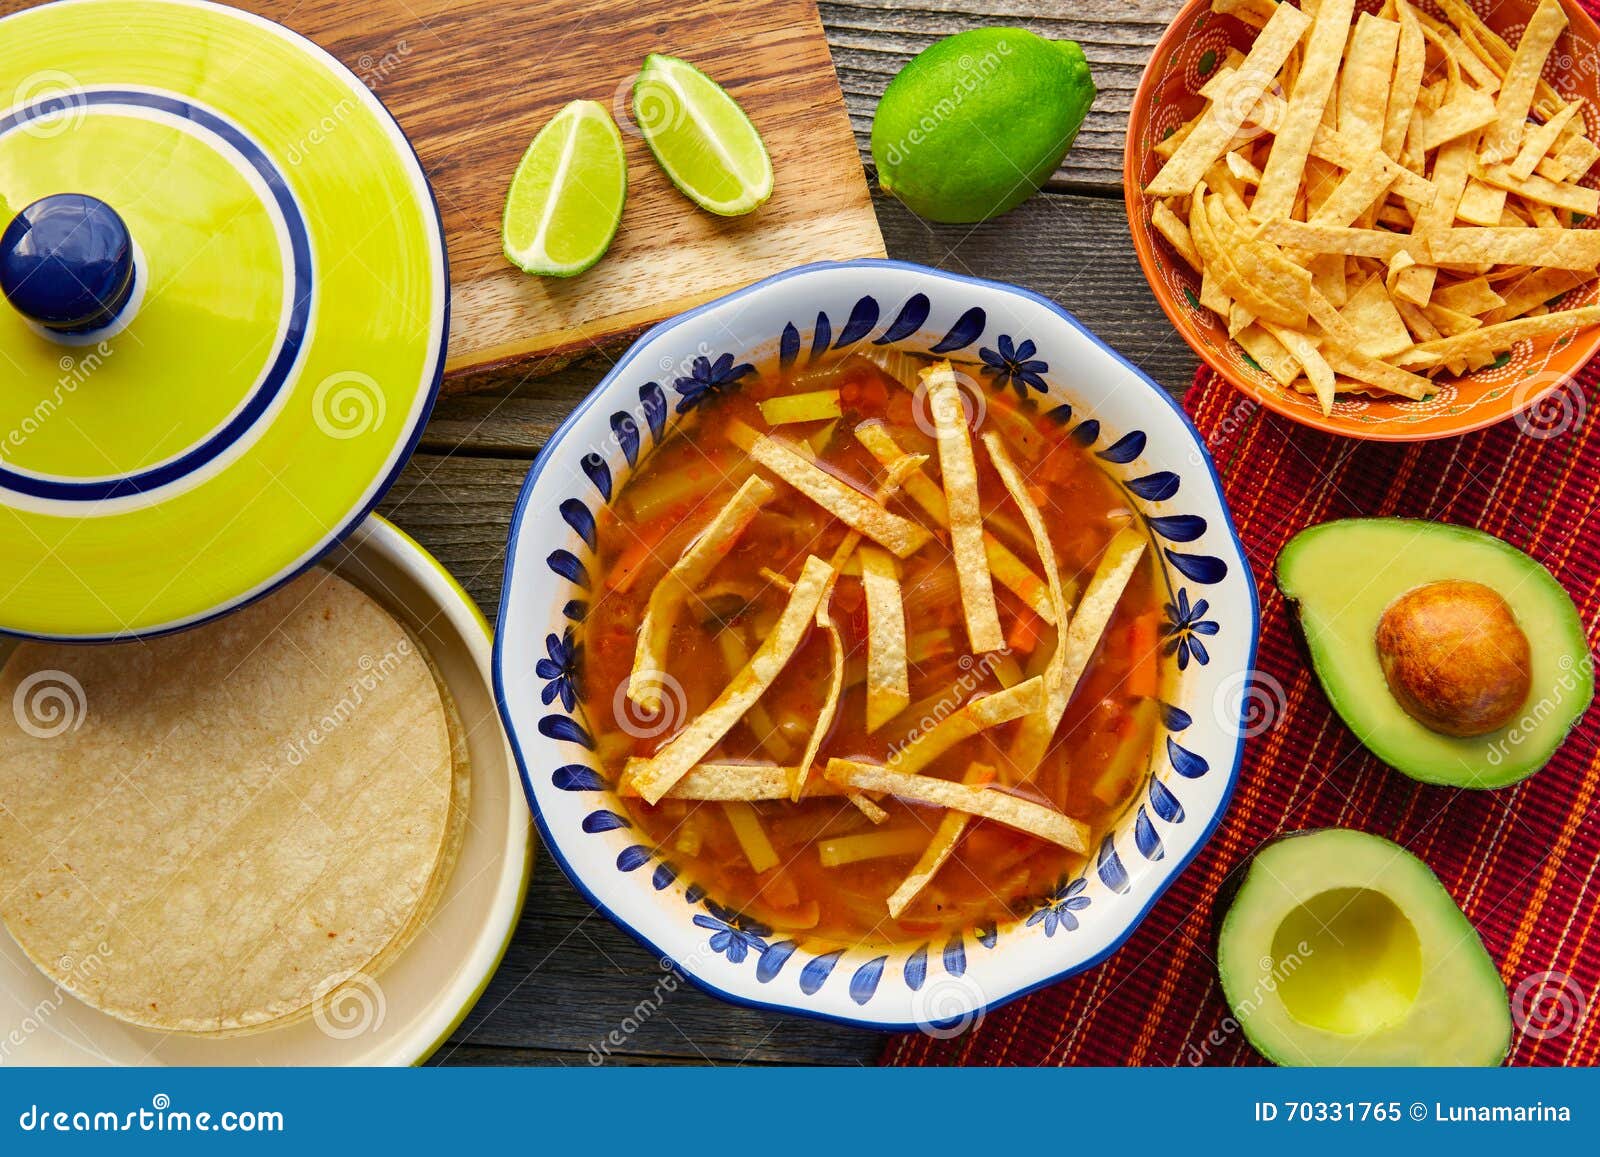 mexican tortilla soup and aguacate